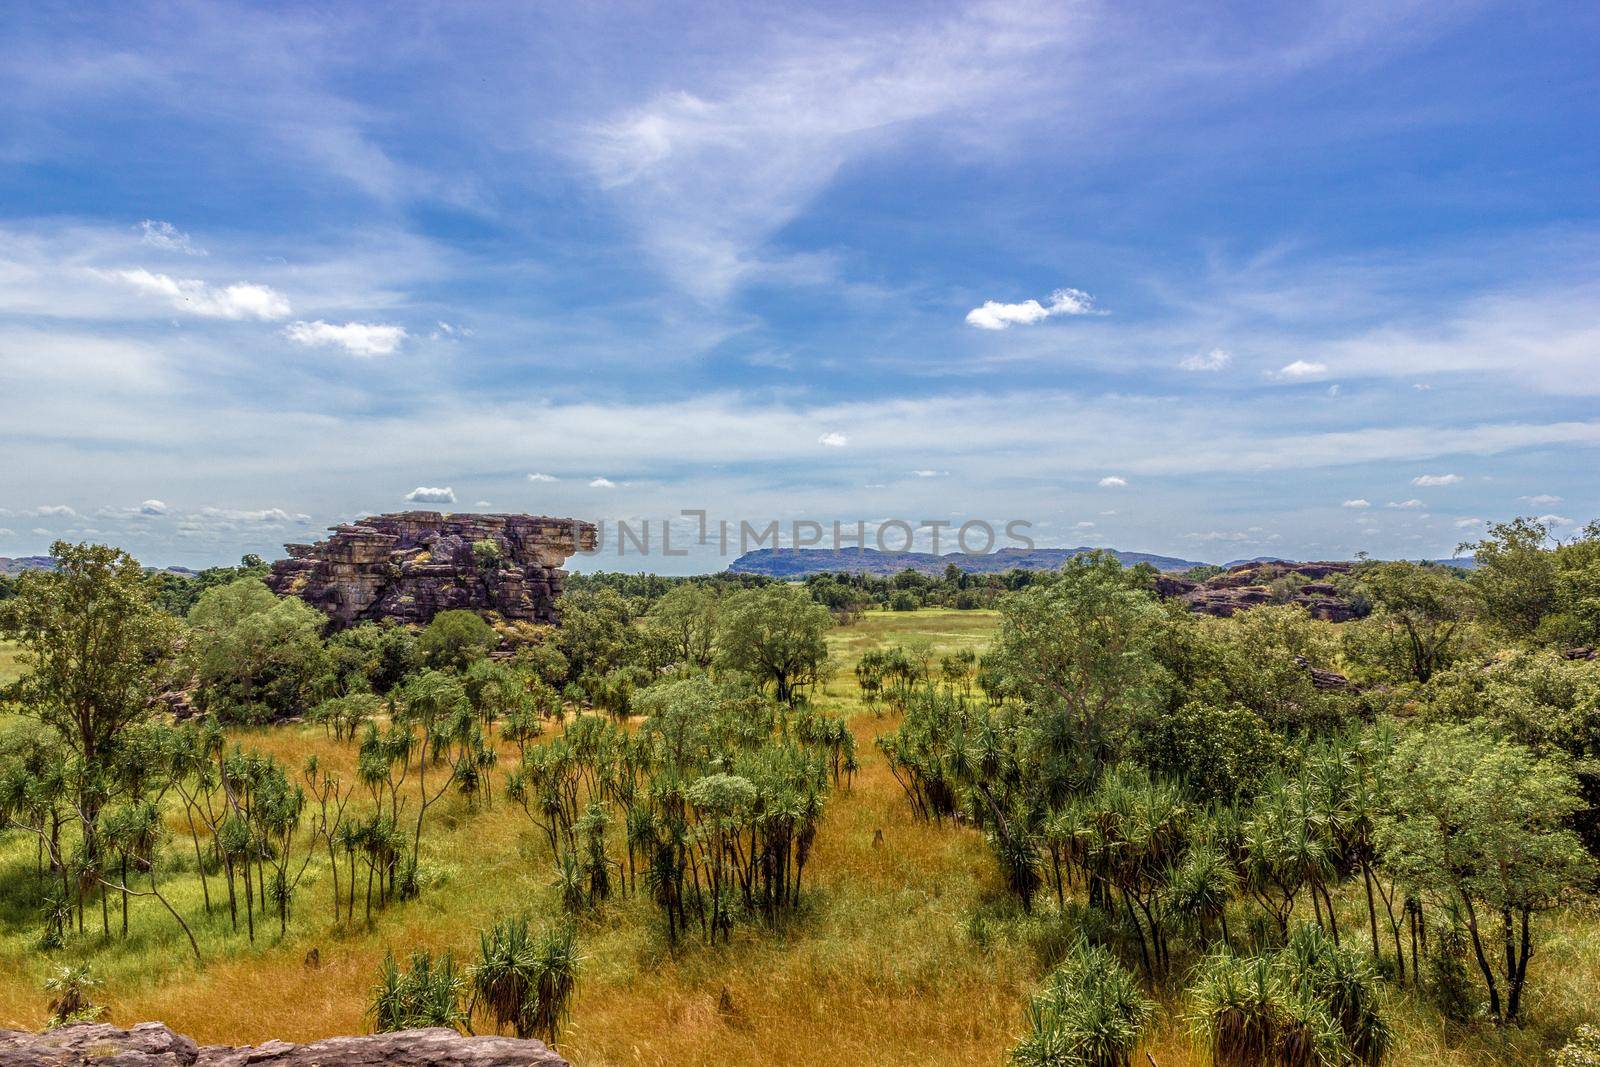 panorama from the Nadab Lookout in ubirr, kakadu national park - australia, northern territory by bettercallcurry